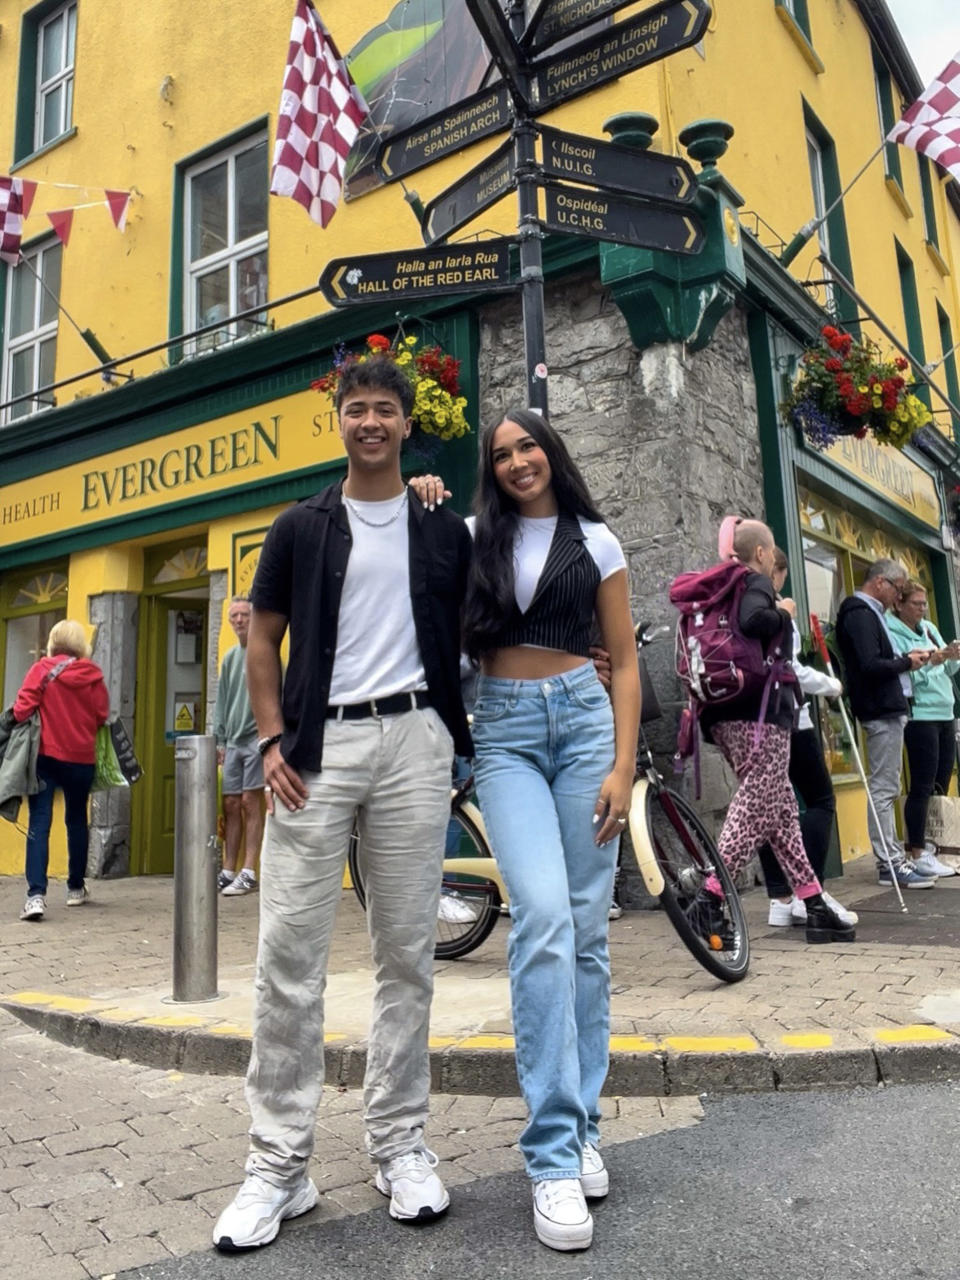 During their tour of Ireland, the two solidified their relationship as a couple. (Courtesy Mackenzie Udani)